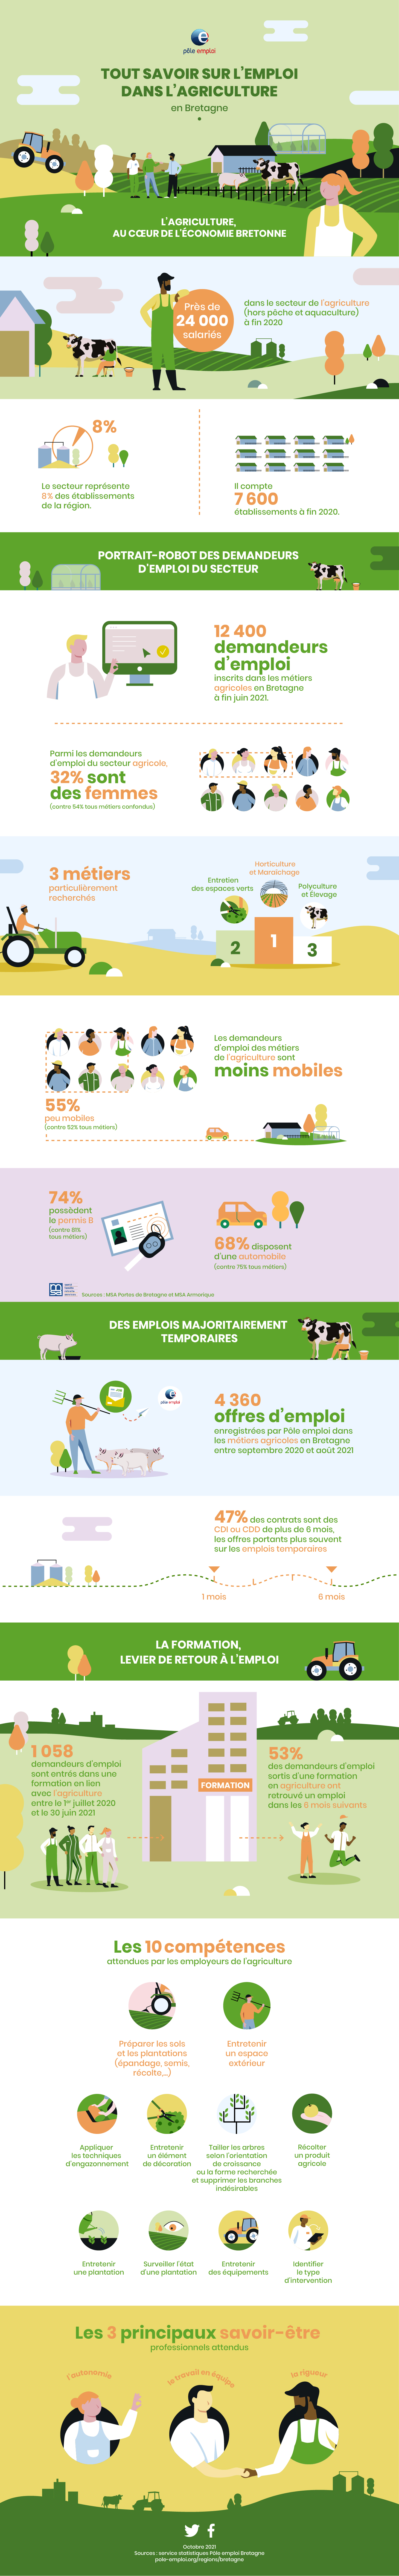 info-Agriculture-PoleEmploi-#EXE.jpg (Maquette-info-Agriculture-PoleEmploi-#4)